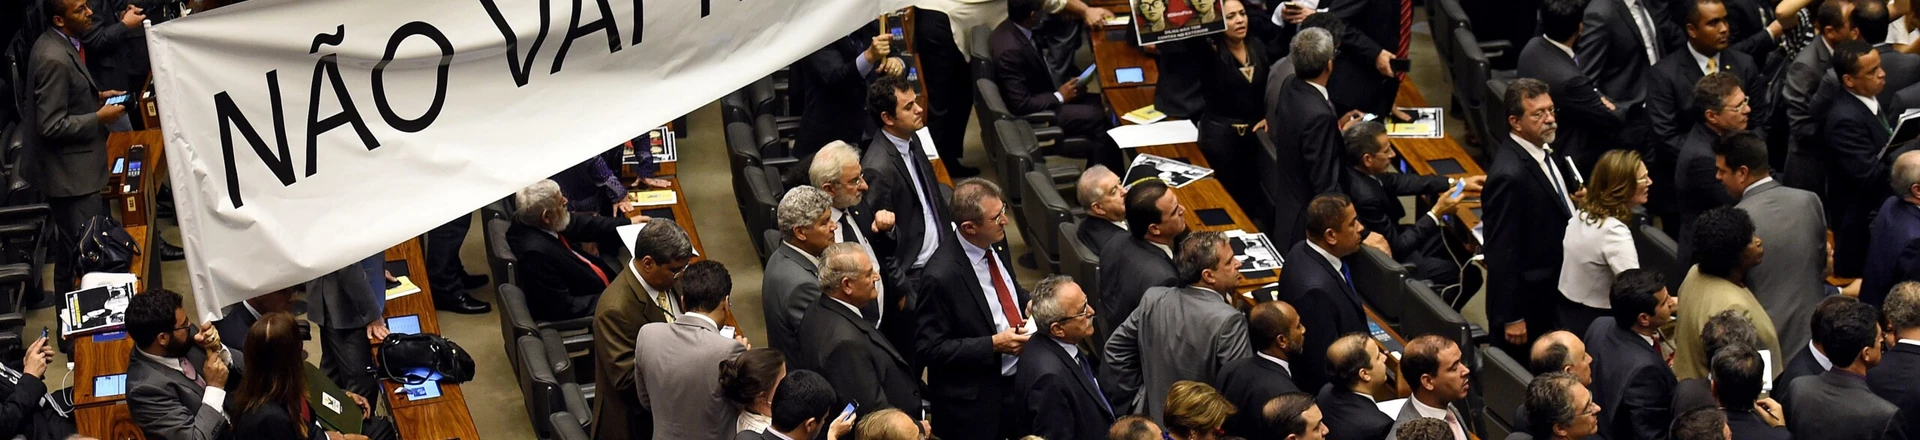 Brazilian pro-government deputies hold a banner reading "There will not be a coup" during the election of members for a special congressional commission that will be first up to analyze the impeachment case against President Dilma Rousseff, at the National Congress in Brasilia, on December 8, 2015. Pro-impeachment deputies got 39 out of 65 seats on the commission, which is tasked with making a recommendation to the full lower house on Rousseff's impeachment. AFP PHOTO/EVARISTO SA / AFP / EVARISTO SA        (Photo credit should read EVARISTO SA/AFP/Getty Images)